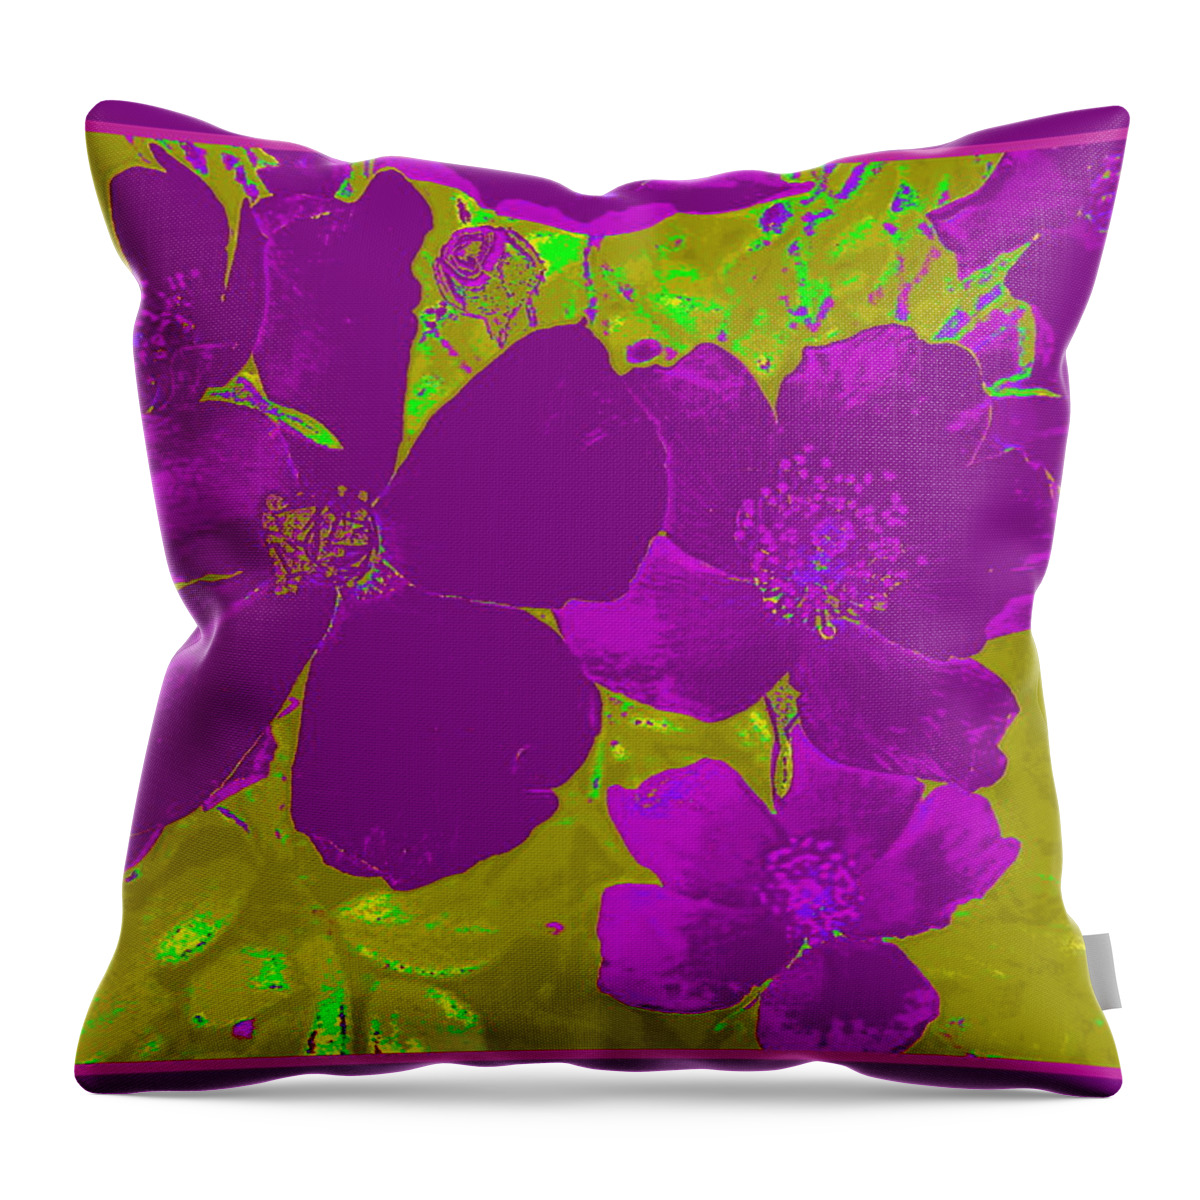 Floral Abstract Throw Pillow featuring the digital art Purple Flower Abstract by Susan Lafleur